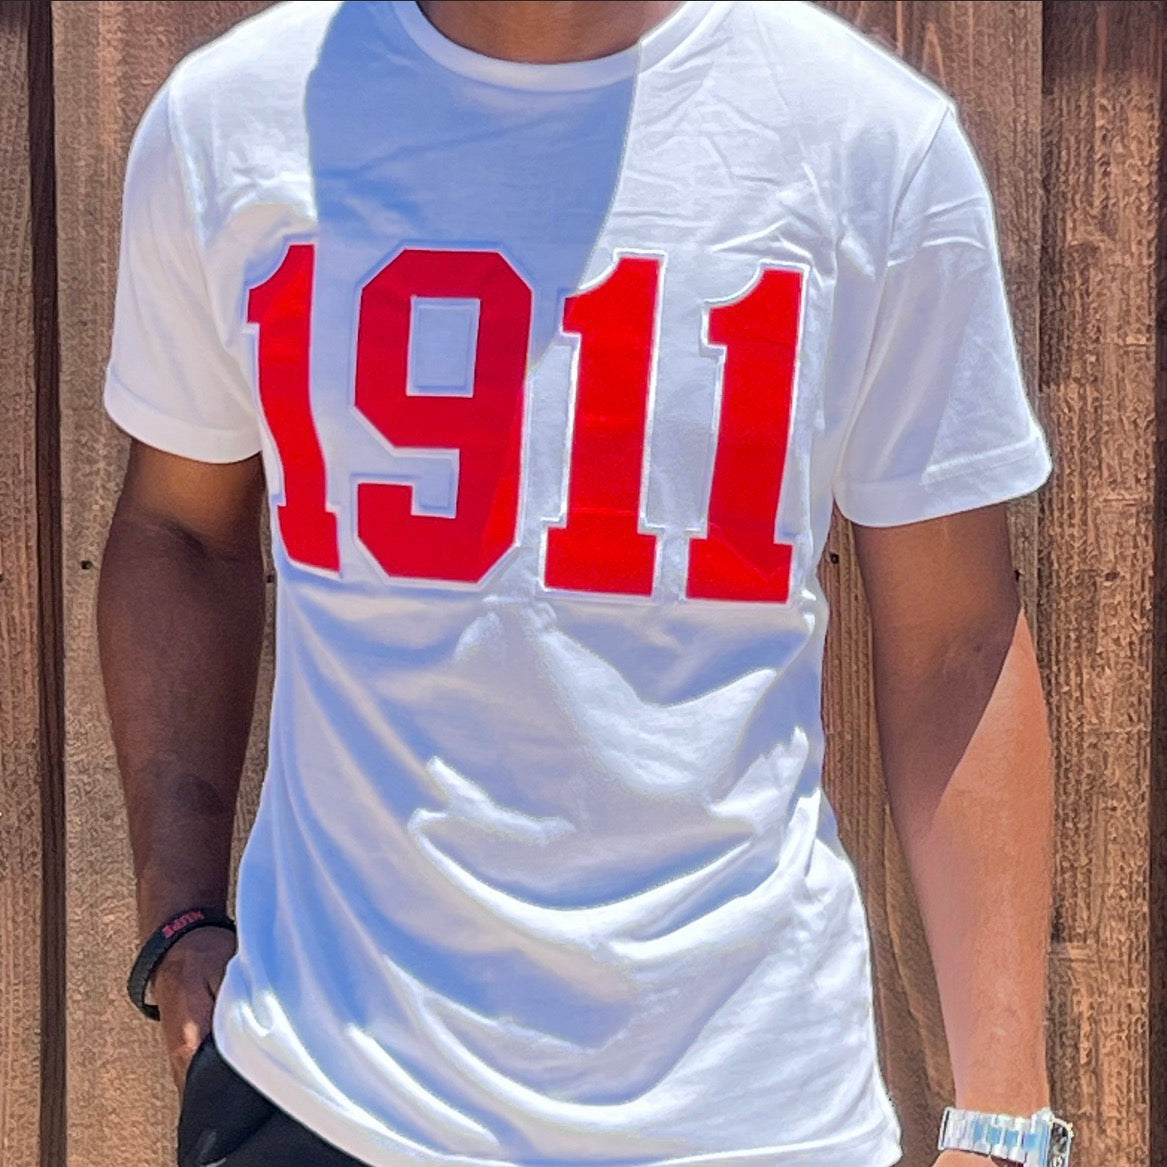 spænding Recollection Anvendt Kappa Alpha Psi 1911 Embroidery T Shirt - White/ Red – Nupekave